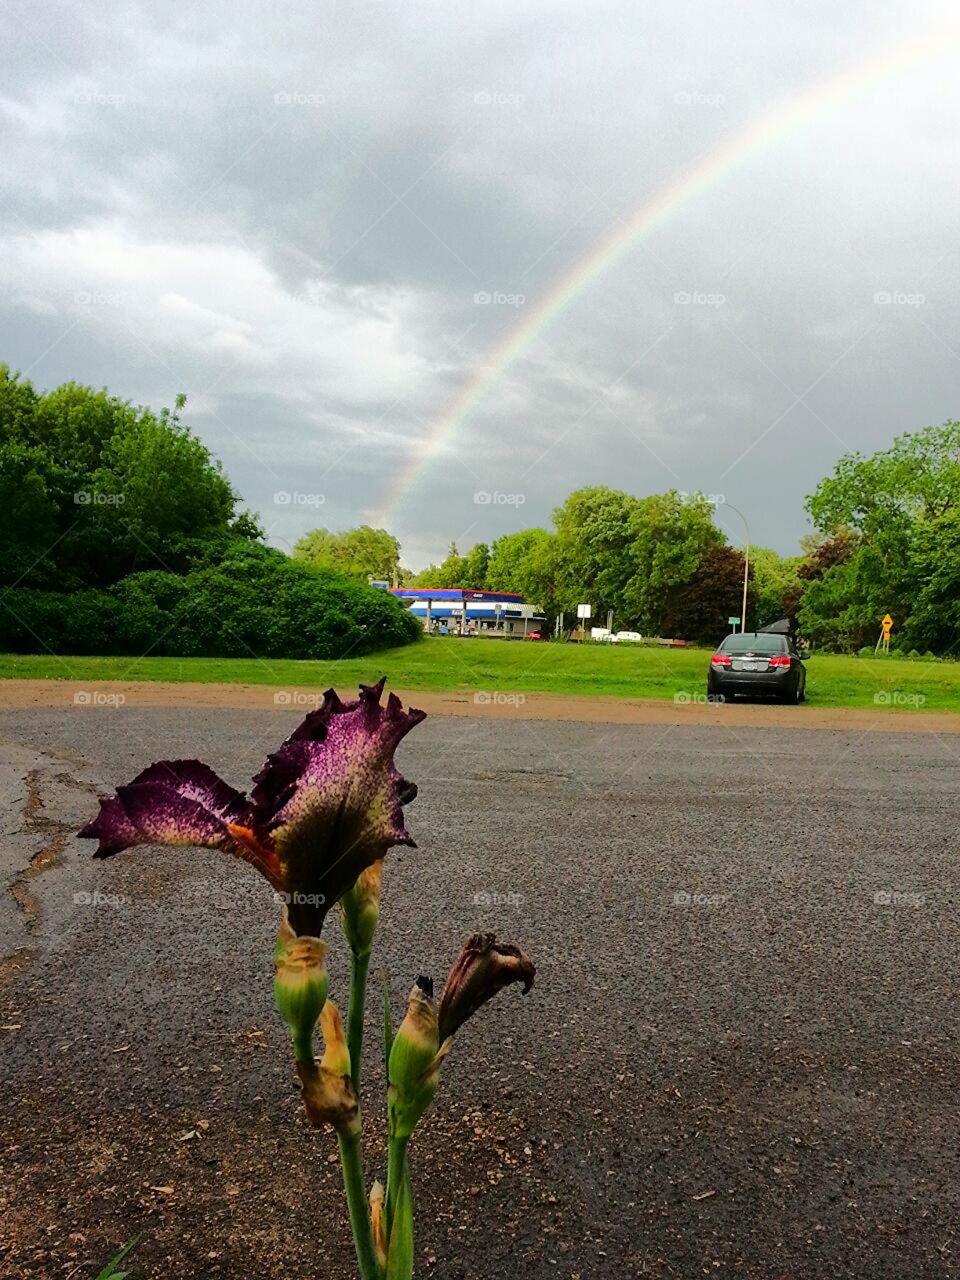 Flower with rainbow in background